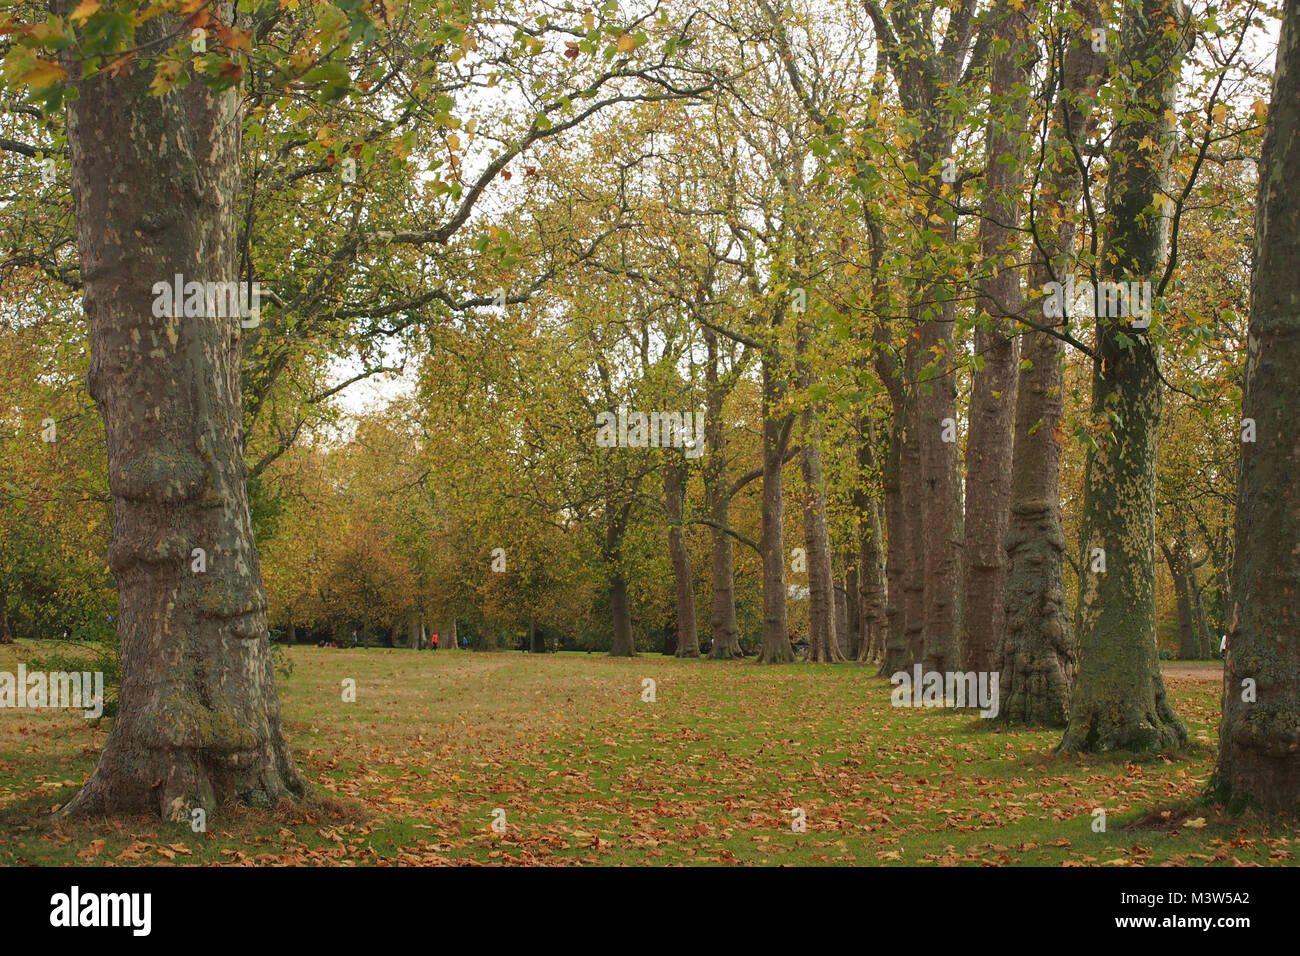 Avenue of mature trees in Kensington Gardens, a Royal Park, in London Stock Photo